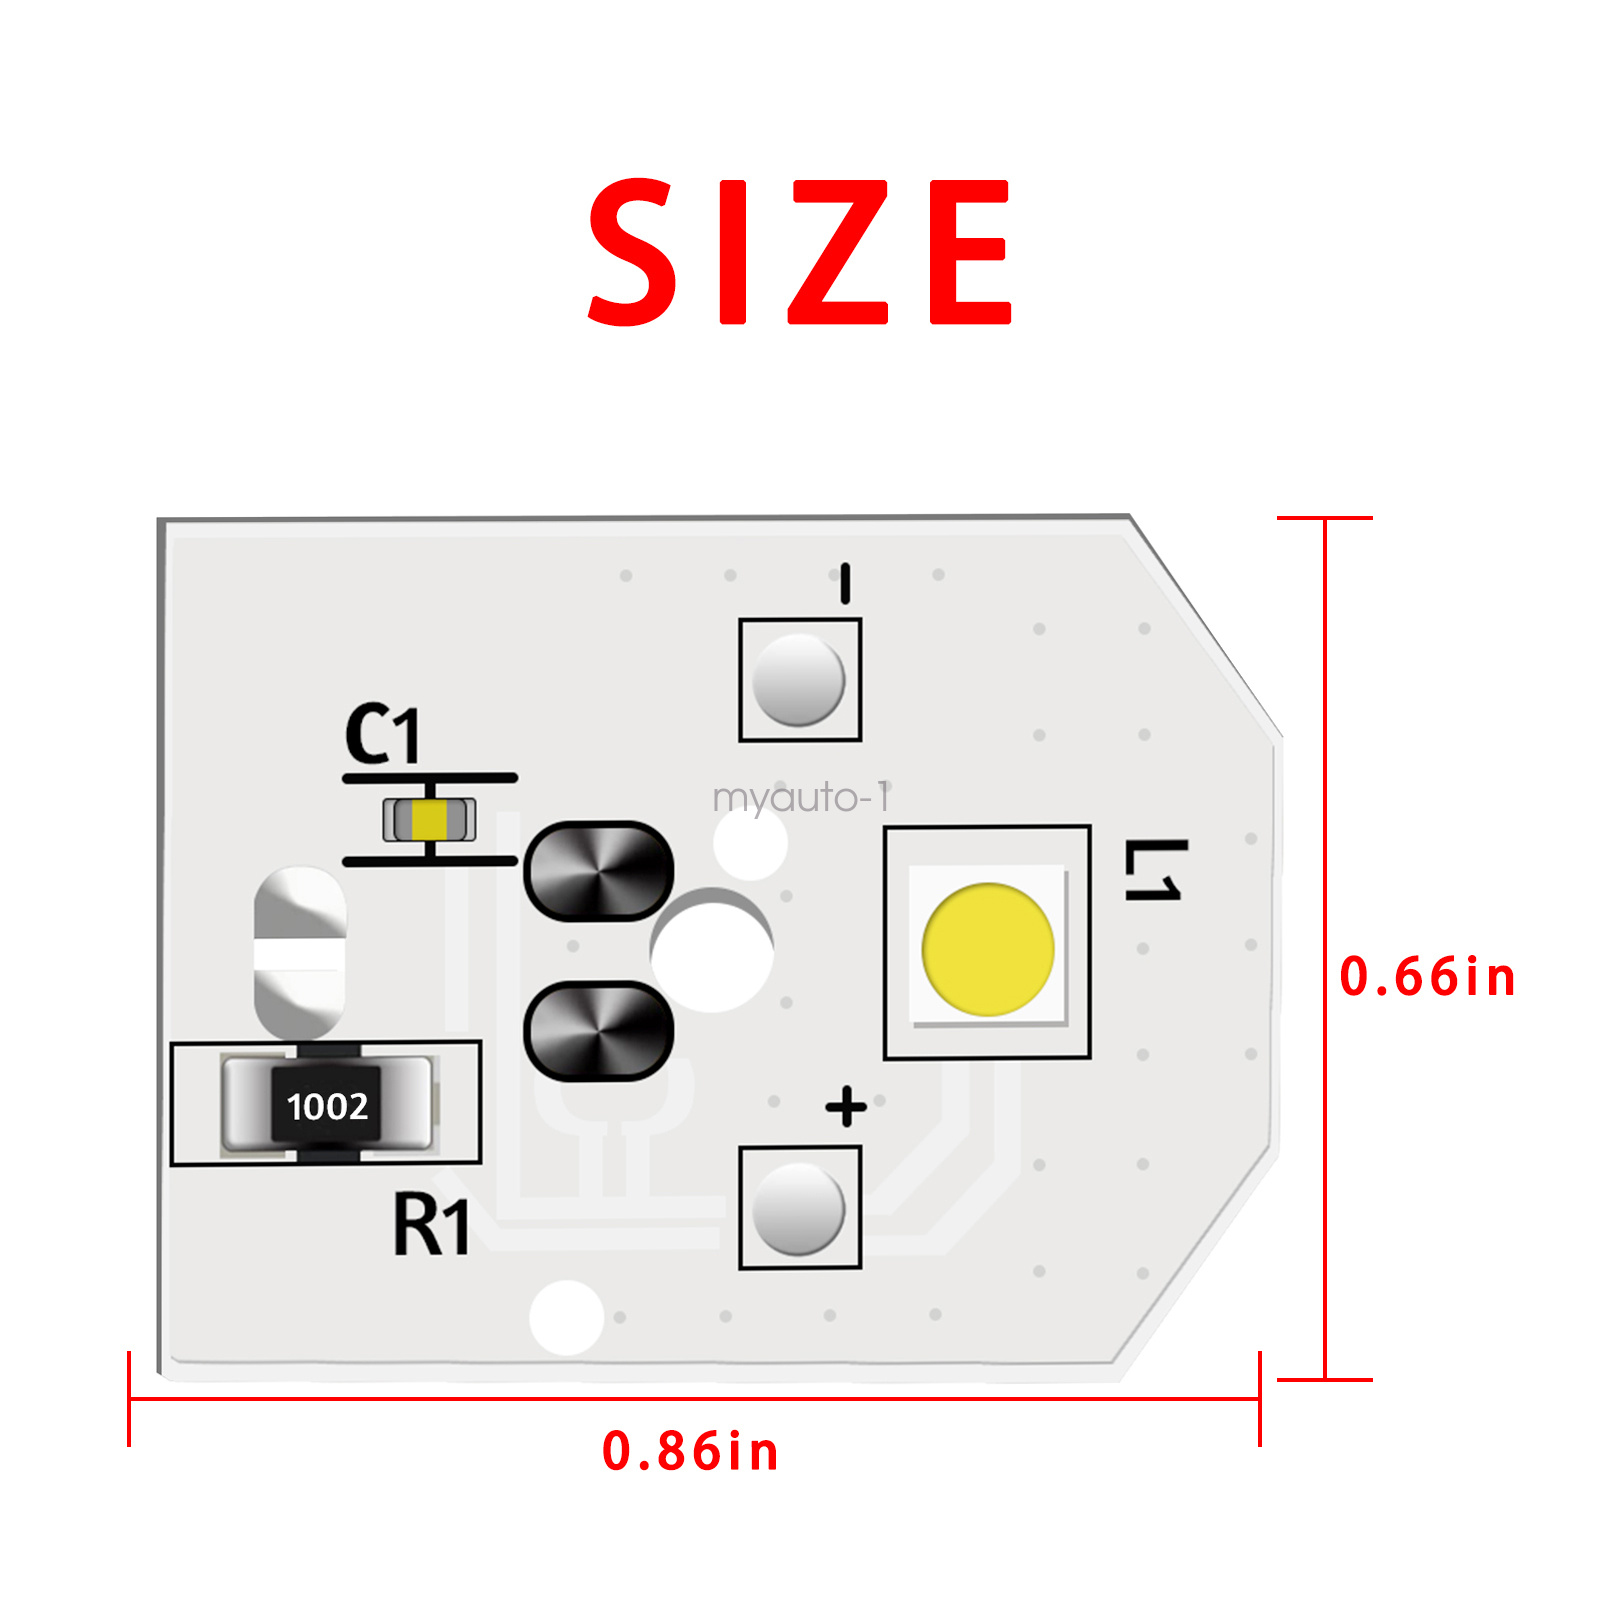  WR55X11132 Refrigerator LED Light WR55X25754 WR55X30602  WR55X26486 PS4704284 fits GE LED Light Replace WR55X26486 PS4704284 3033142  EAP12172918 AP6261806 2 Pack : Appliances